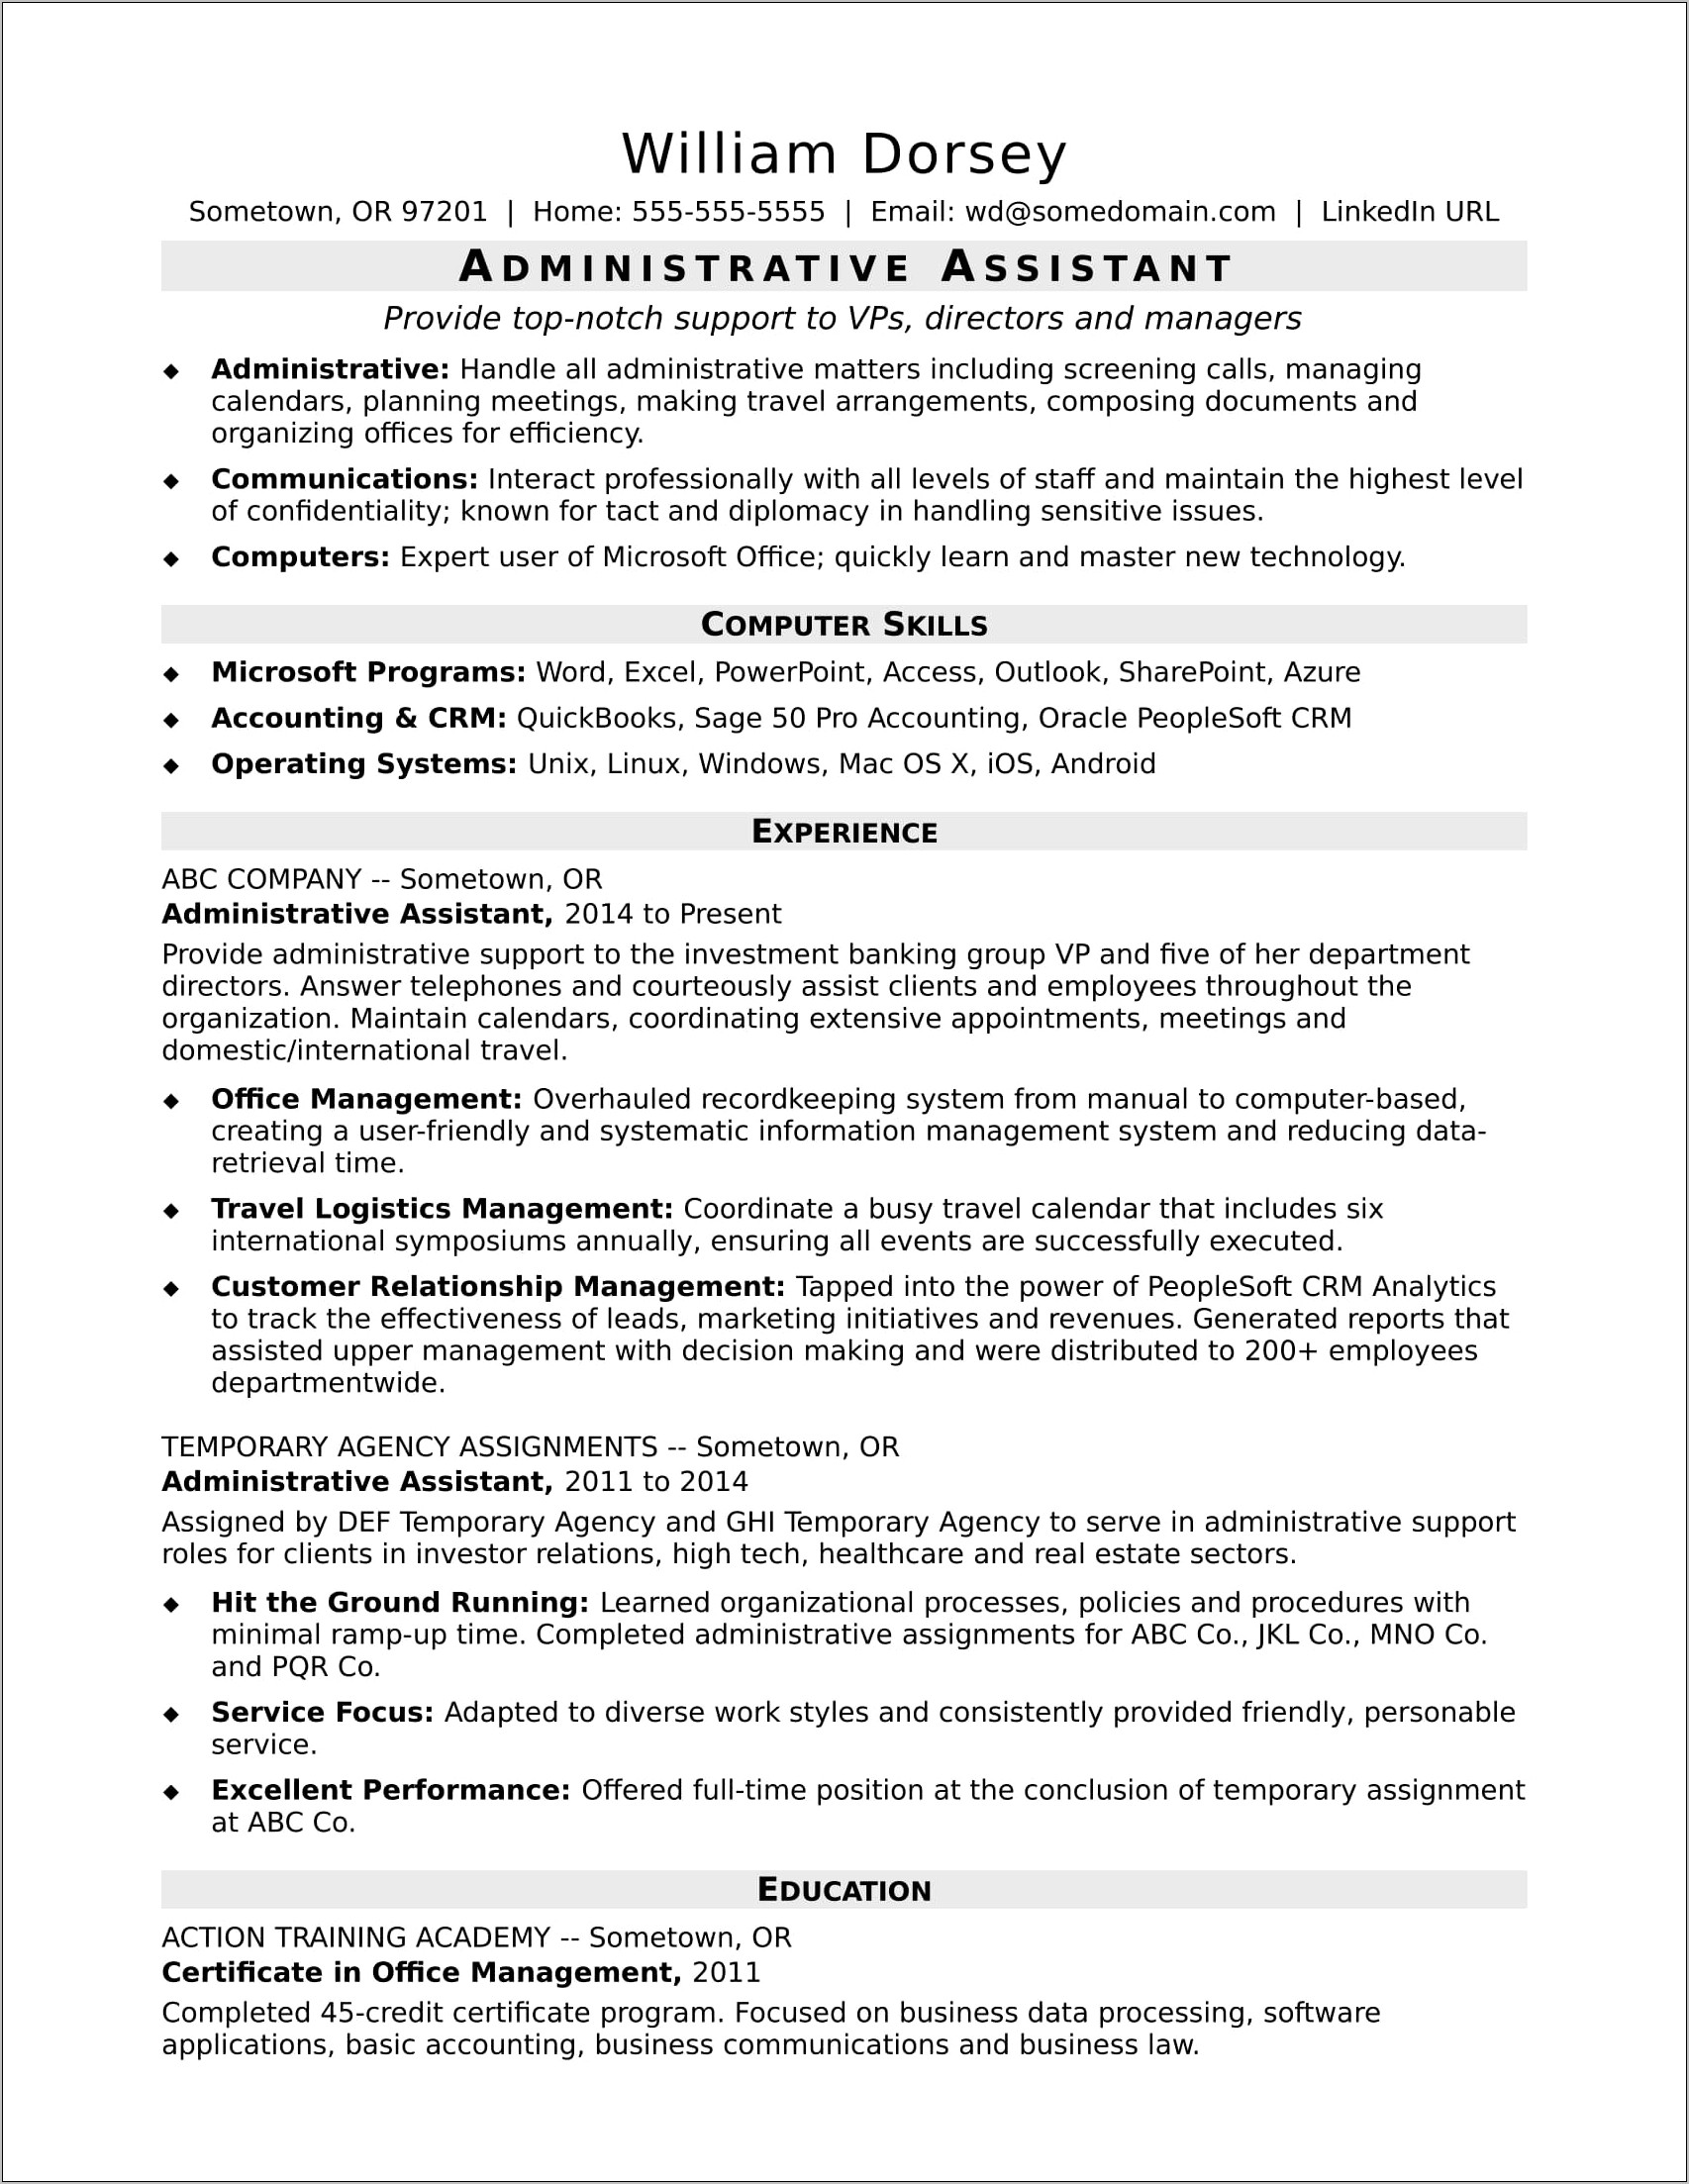 Job Duties For Administrative Assistant For Resume